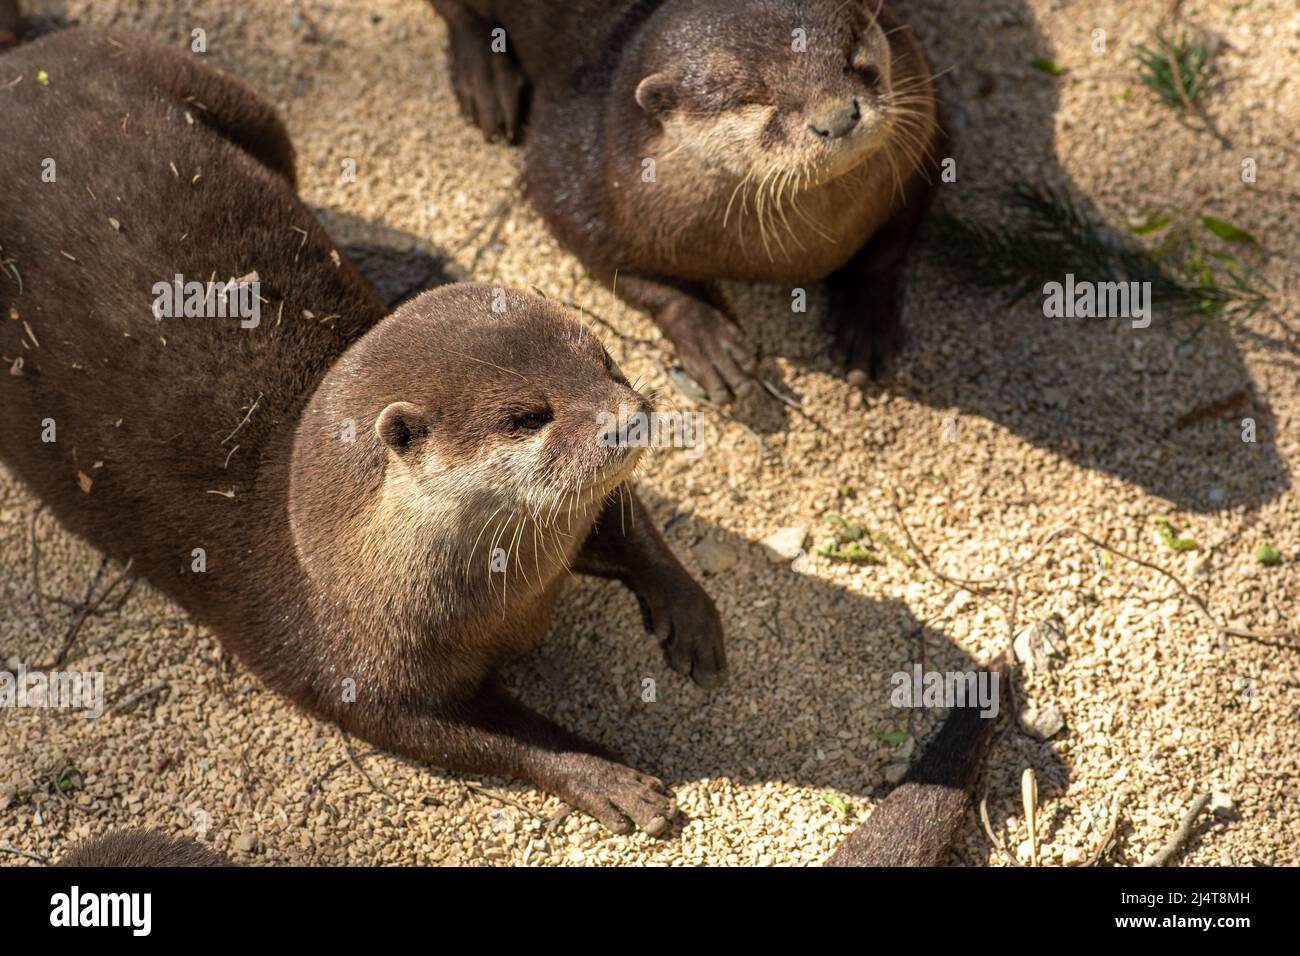 Couple of otters near a river, carnivorous mammals in the subfamily Lutrinae. Semiaquatic, aquatic or marine, with diets based on fish Stock Photo